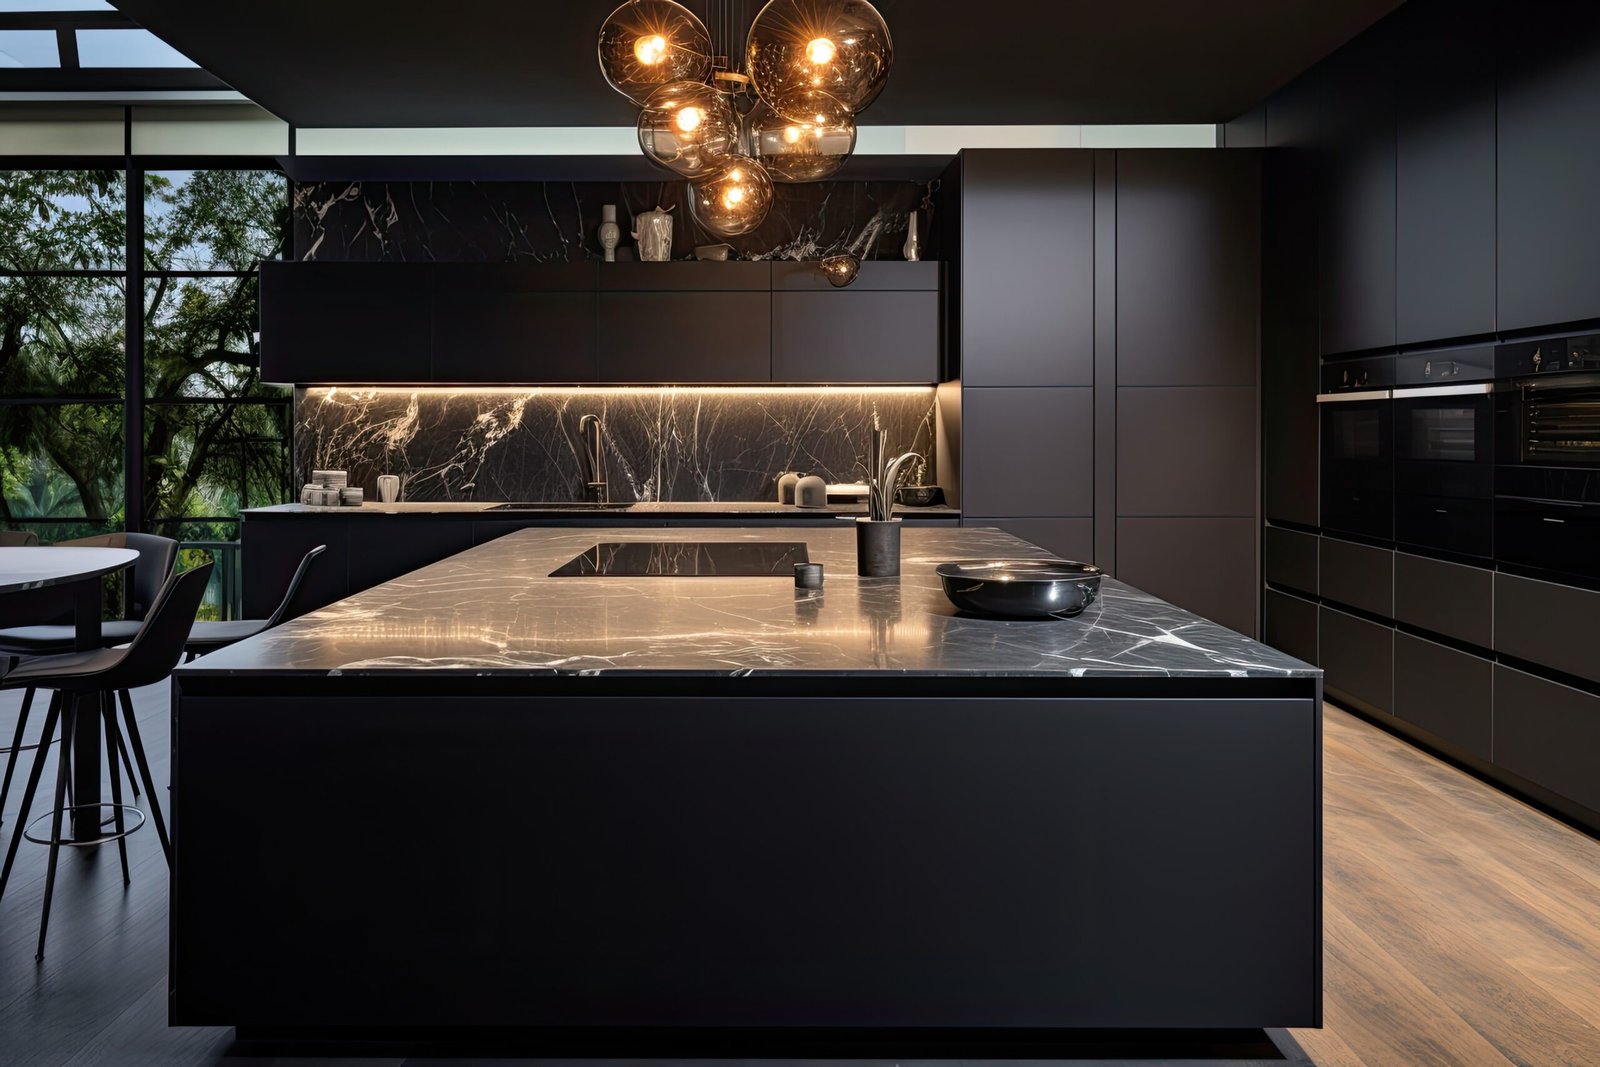 A contemporary kitchen with sleek cabinets without handles, featuring black edges and black glass appliances. The kitchen includes a stylish marble island and countertops.